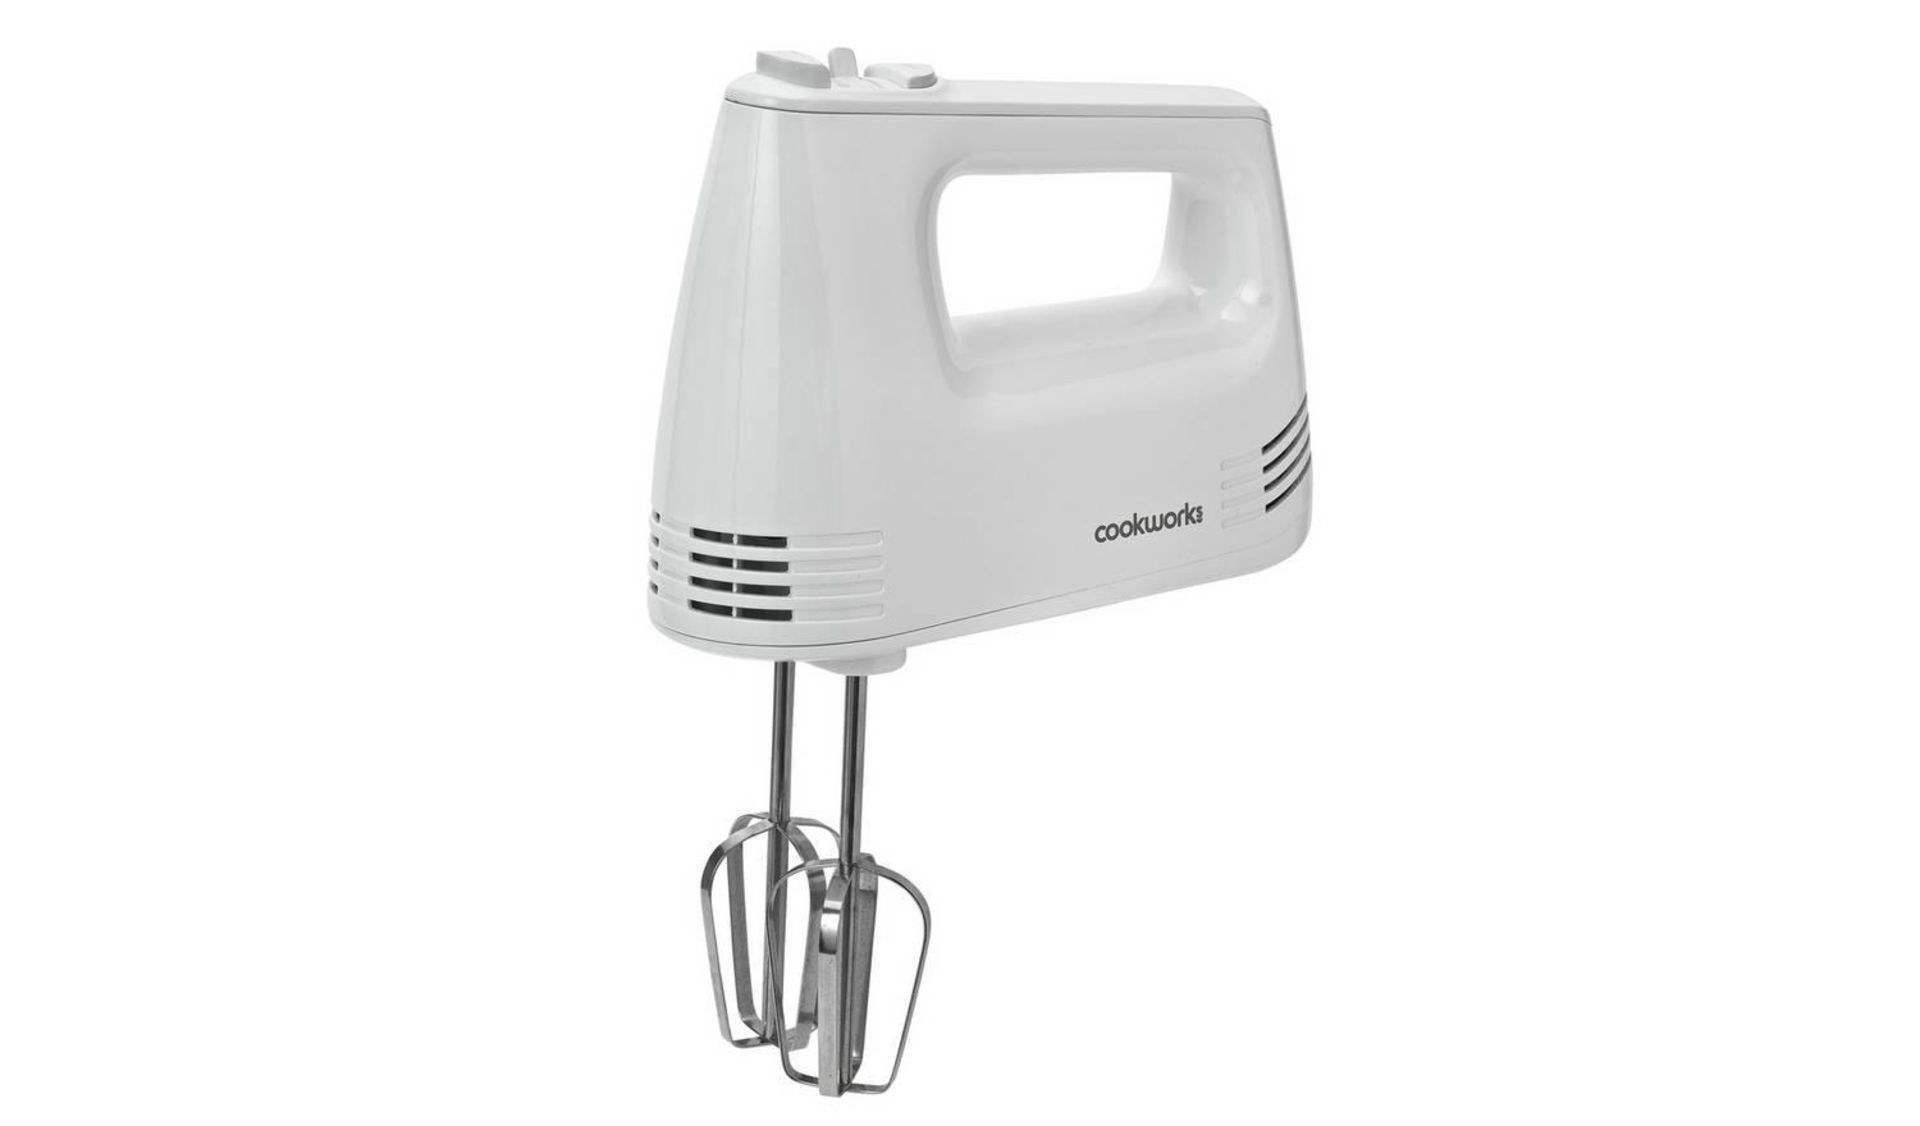 Cookworks Hand Mixer - White, £9.99 RRP